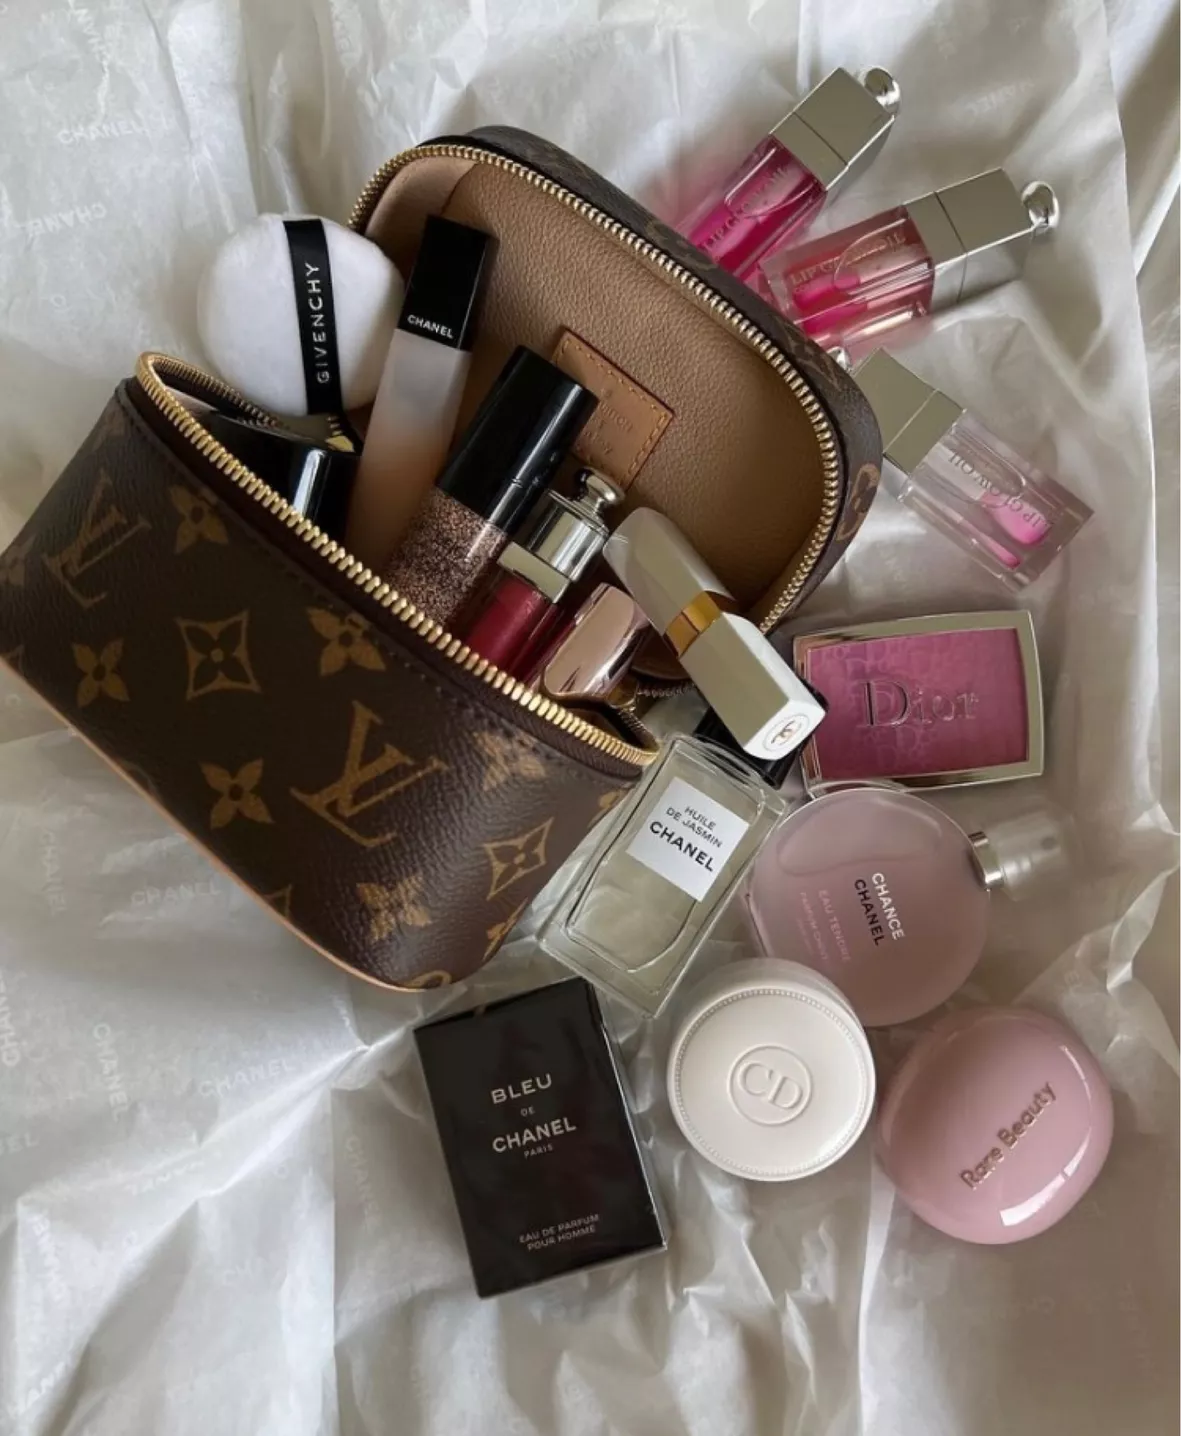 CHANEL, Bags, Chanel Beauty To Go Travel Set Beauty Black Case Pouch  Makeup Chance Lip Balm